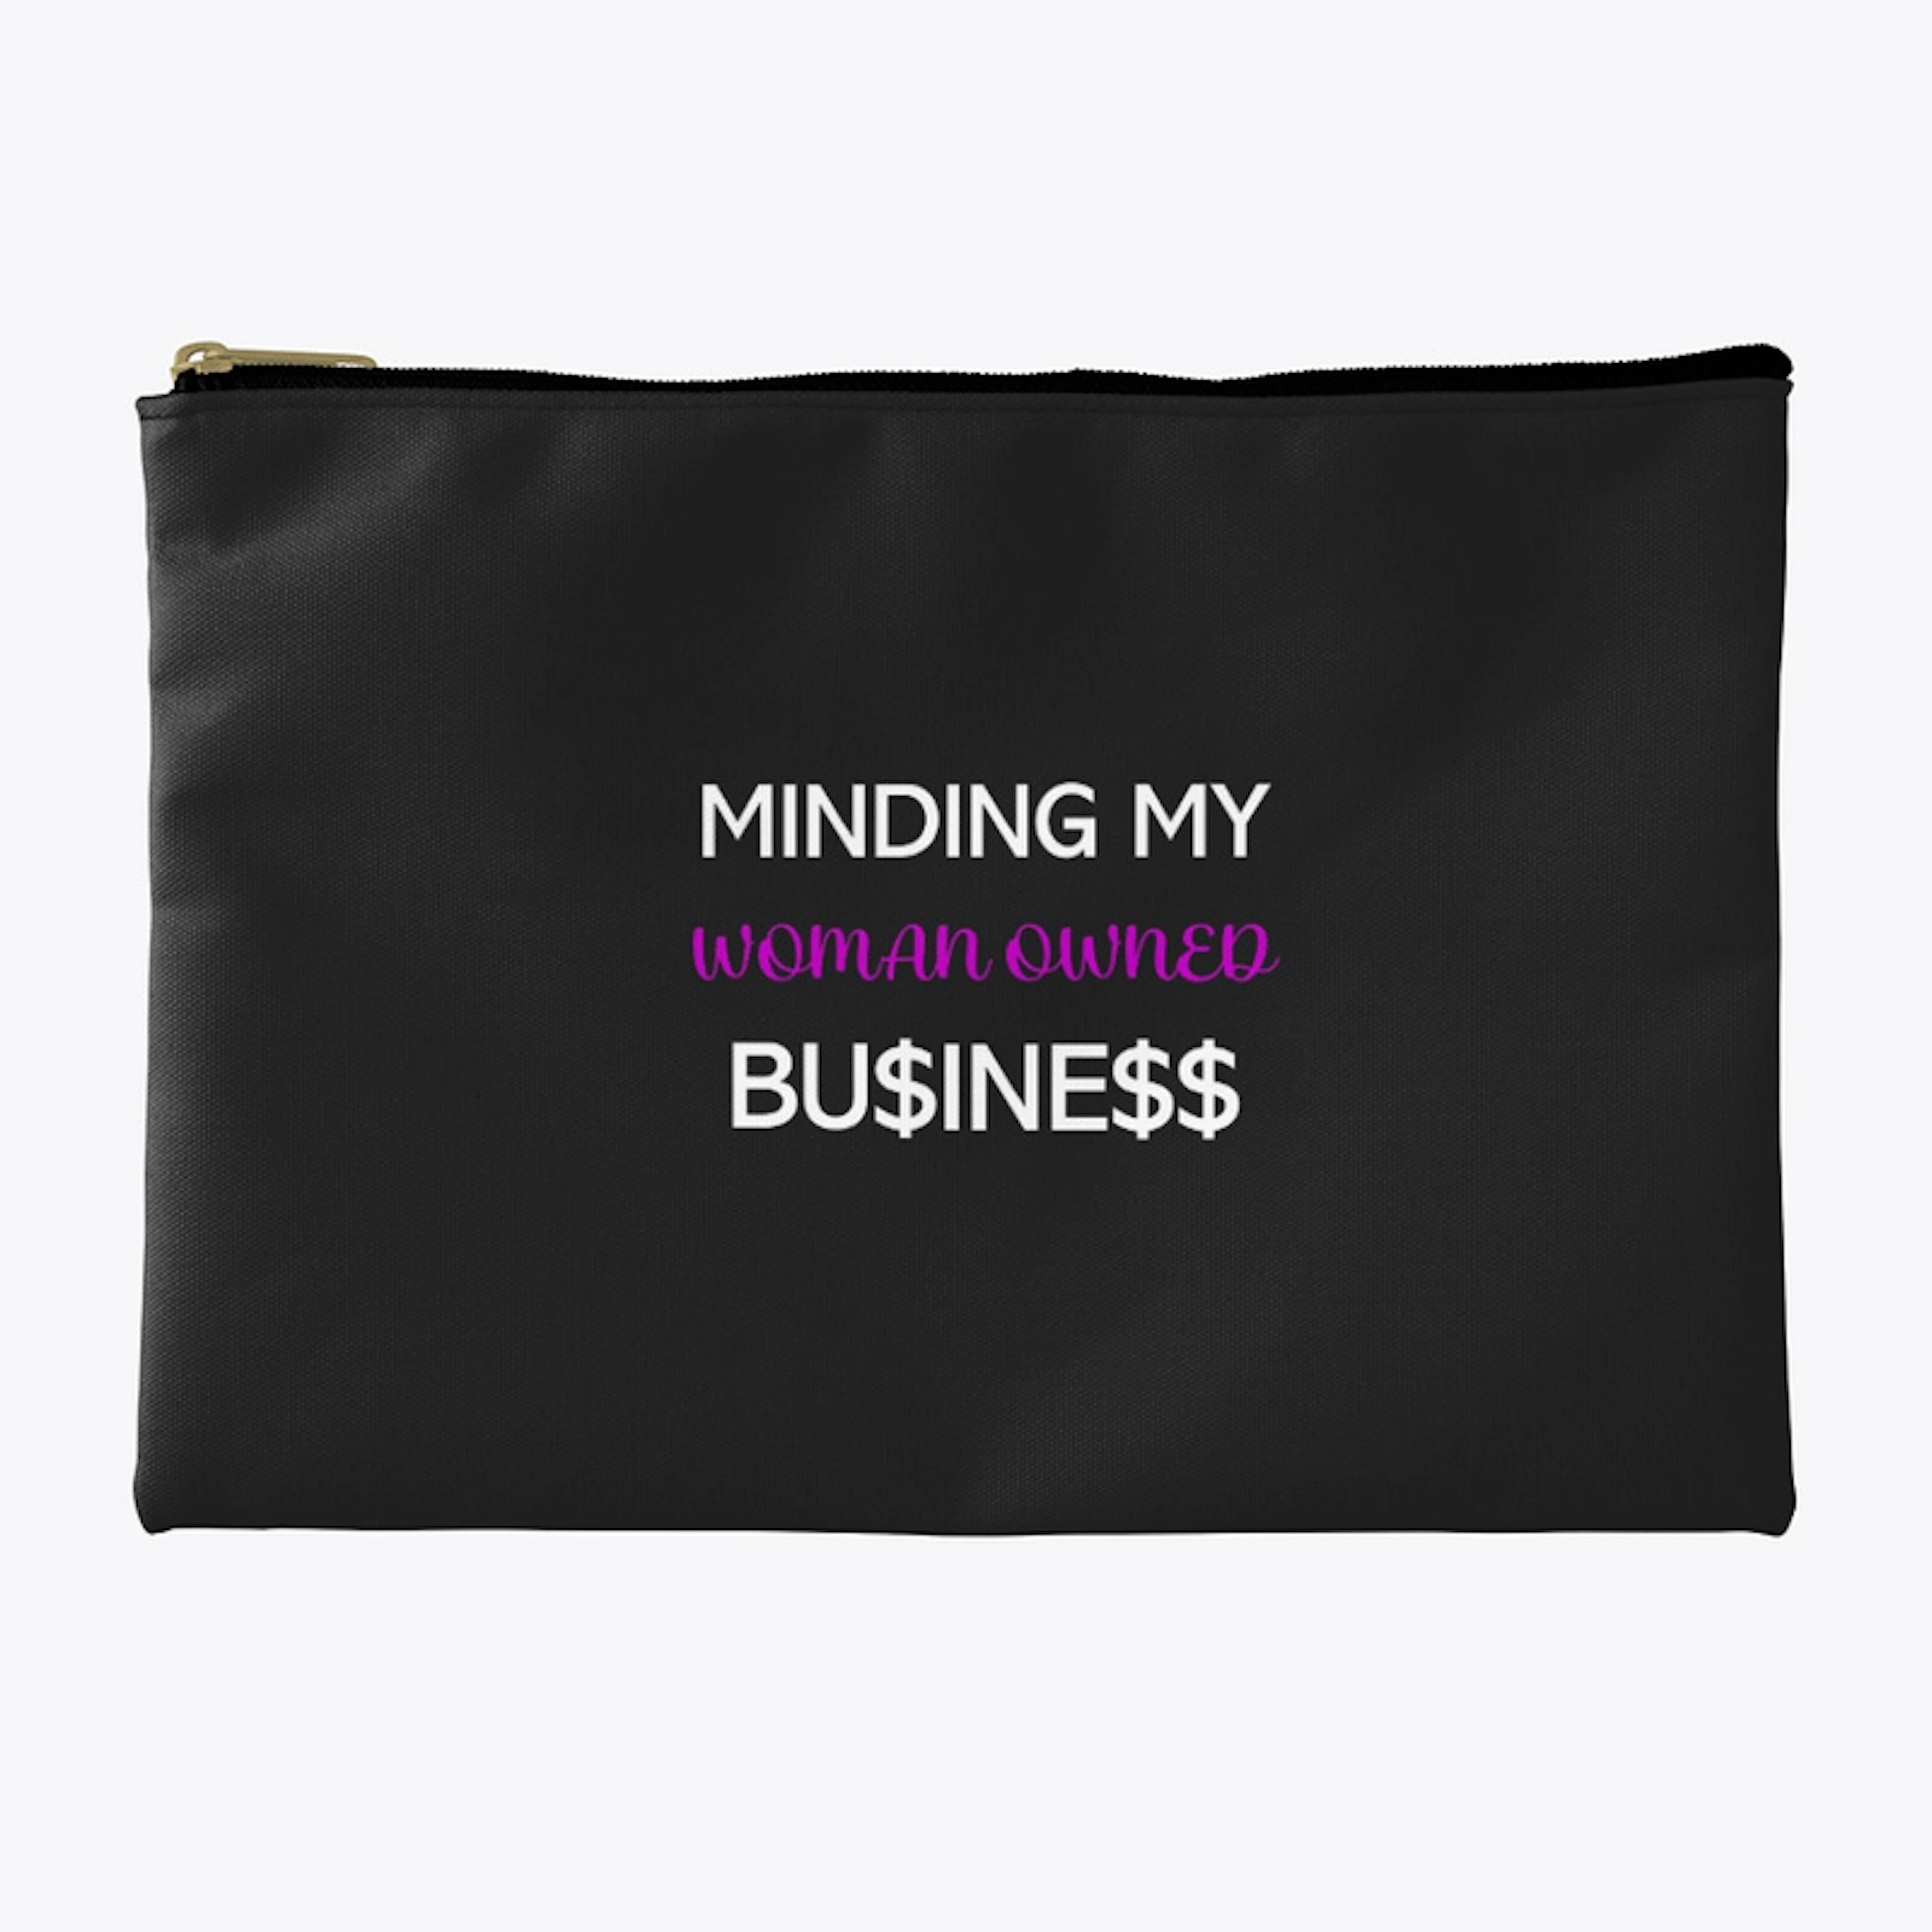 Minding My Woman Owned Business Pouch